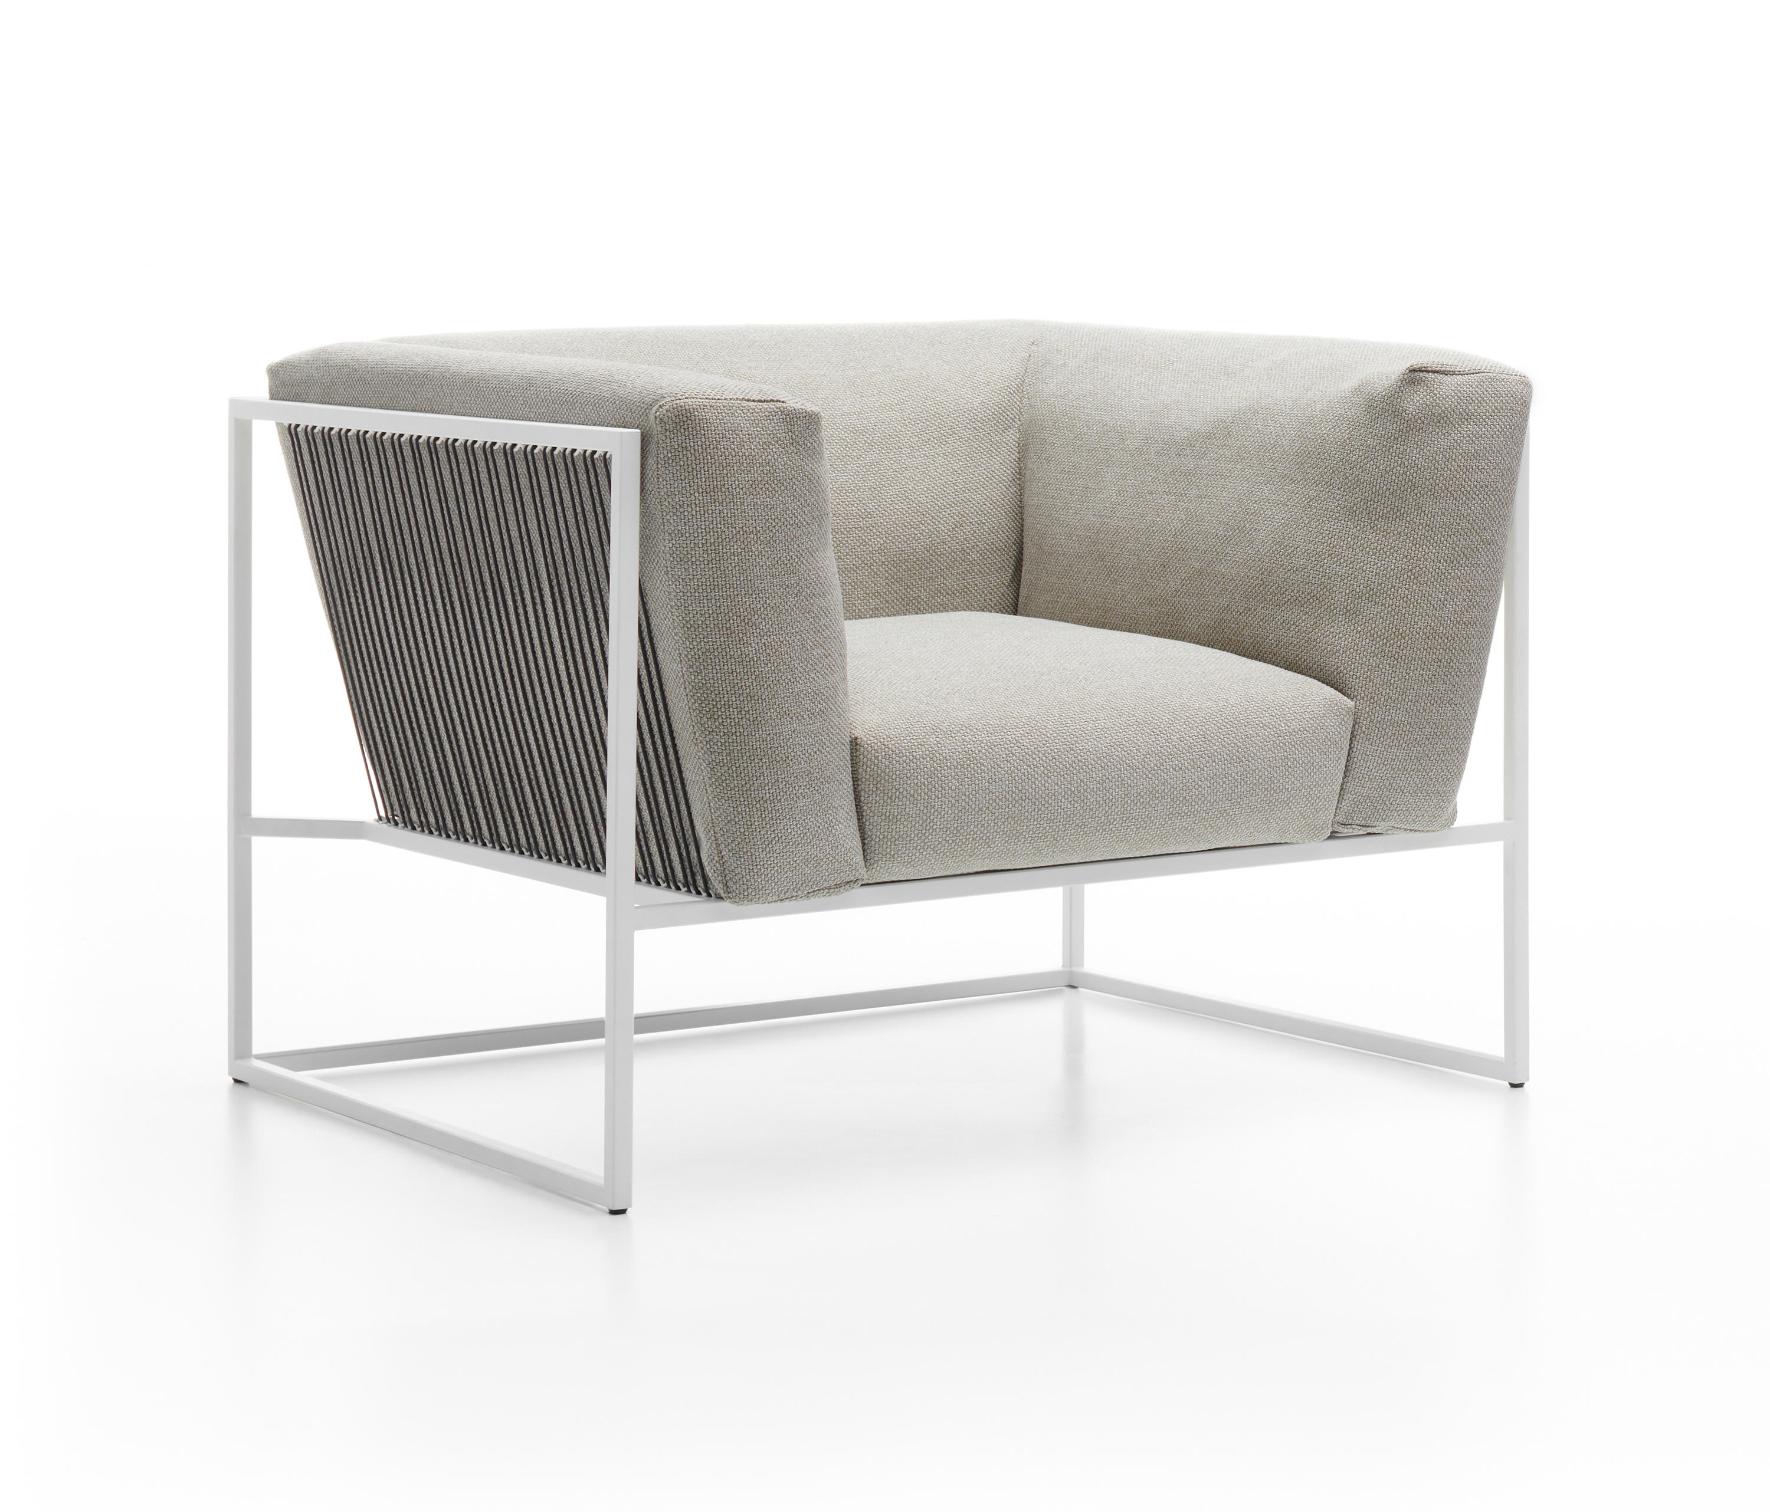 Arpa Outdoor Armchair ☞ Finishing: R550 Col.Ecrù